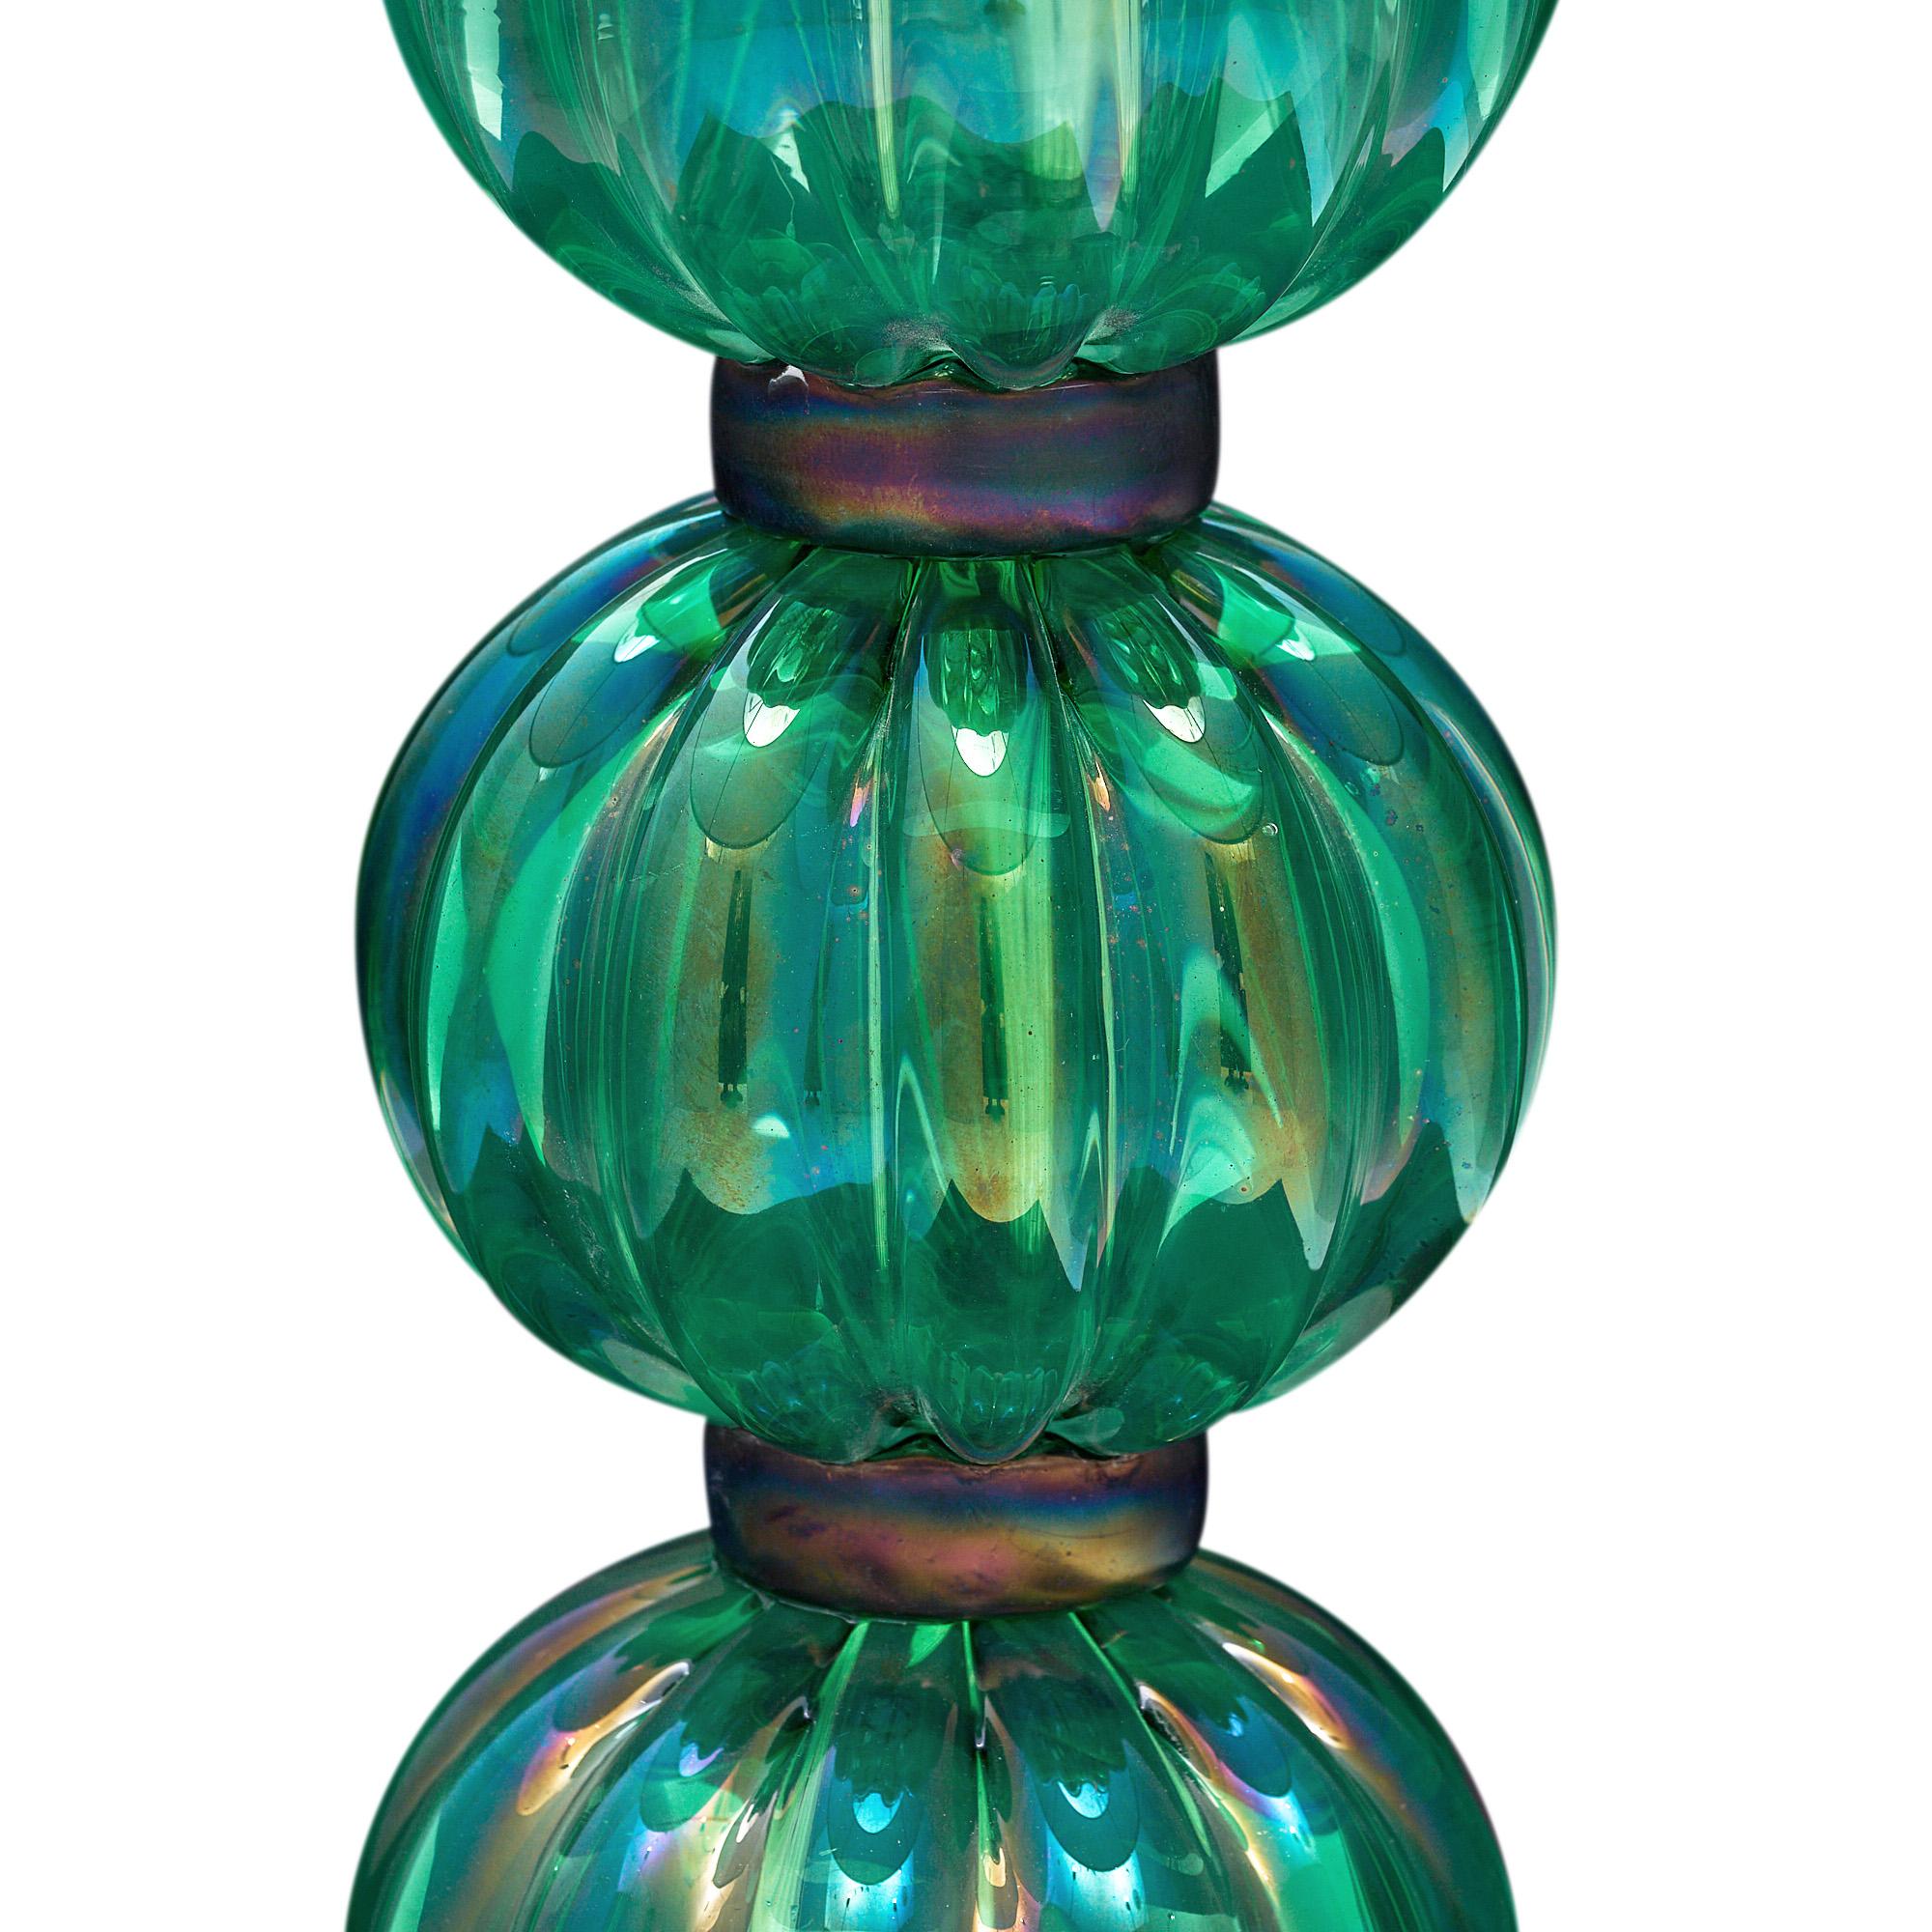 Pair of lamps from Murano, Italy made of hand-blown green emerald iridescent colored glass. They have been newly wired to fit US standards.